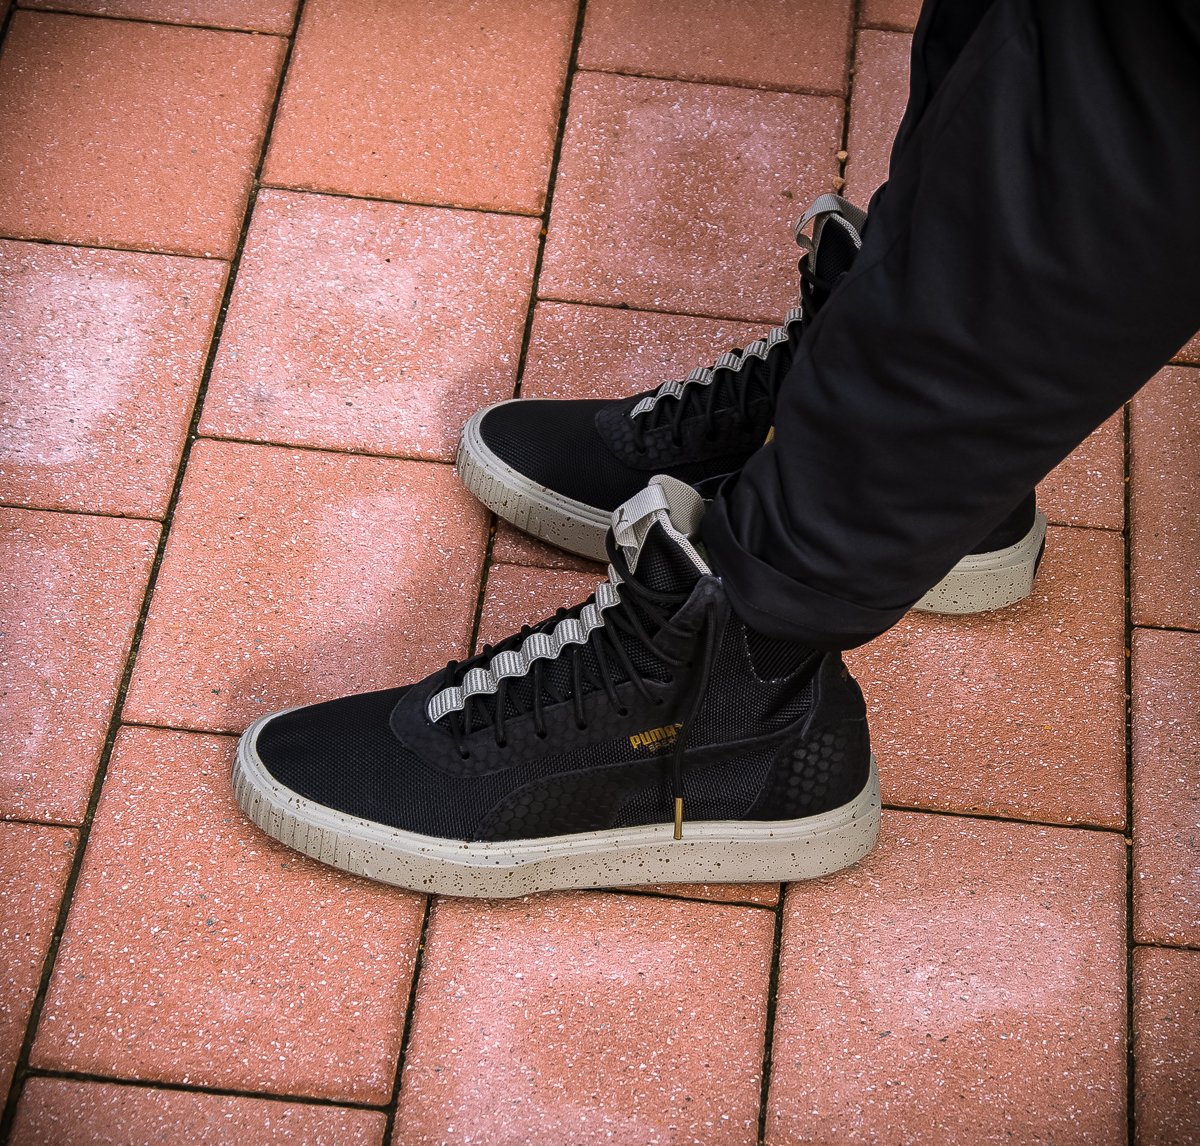 Solekitchen on Twitter: "Classic design to a whole new level of modern and futuristic style! The Puma Breaker „Black/Elephant Skin“ is now available online and instore! 40,5 - 45